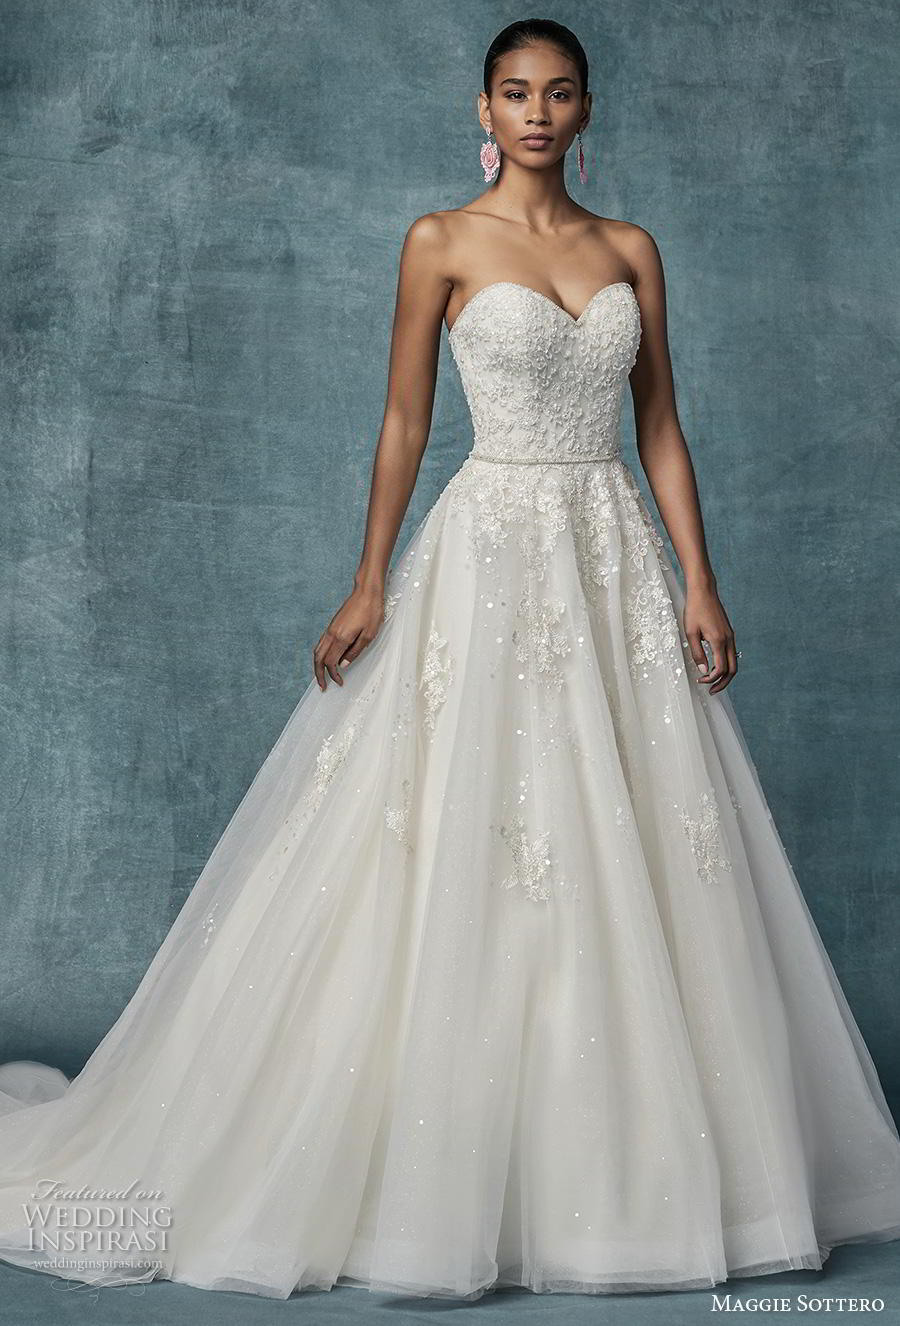 Maggie Sottero Spring 2019 Wedding Dresses — “Alistaire” Bridal ...